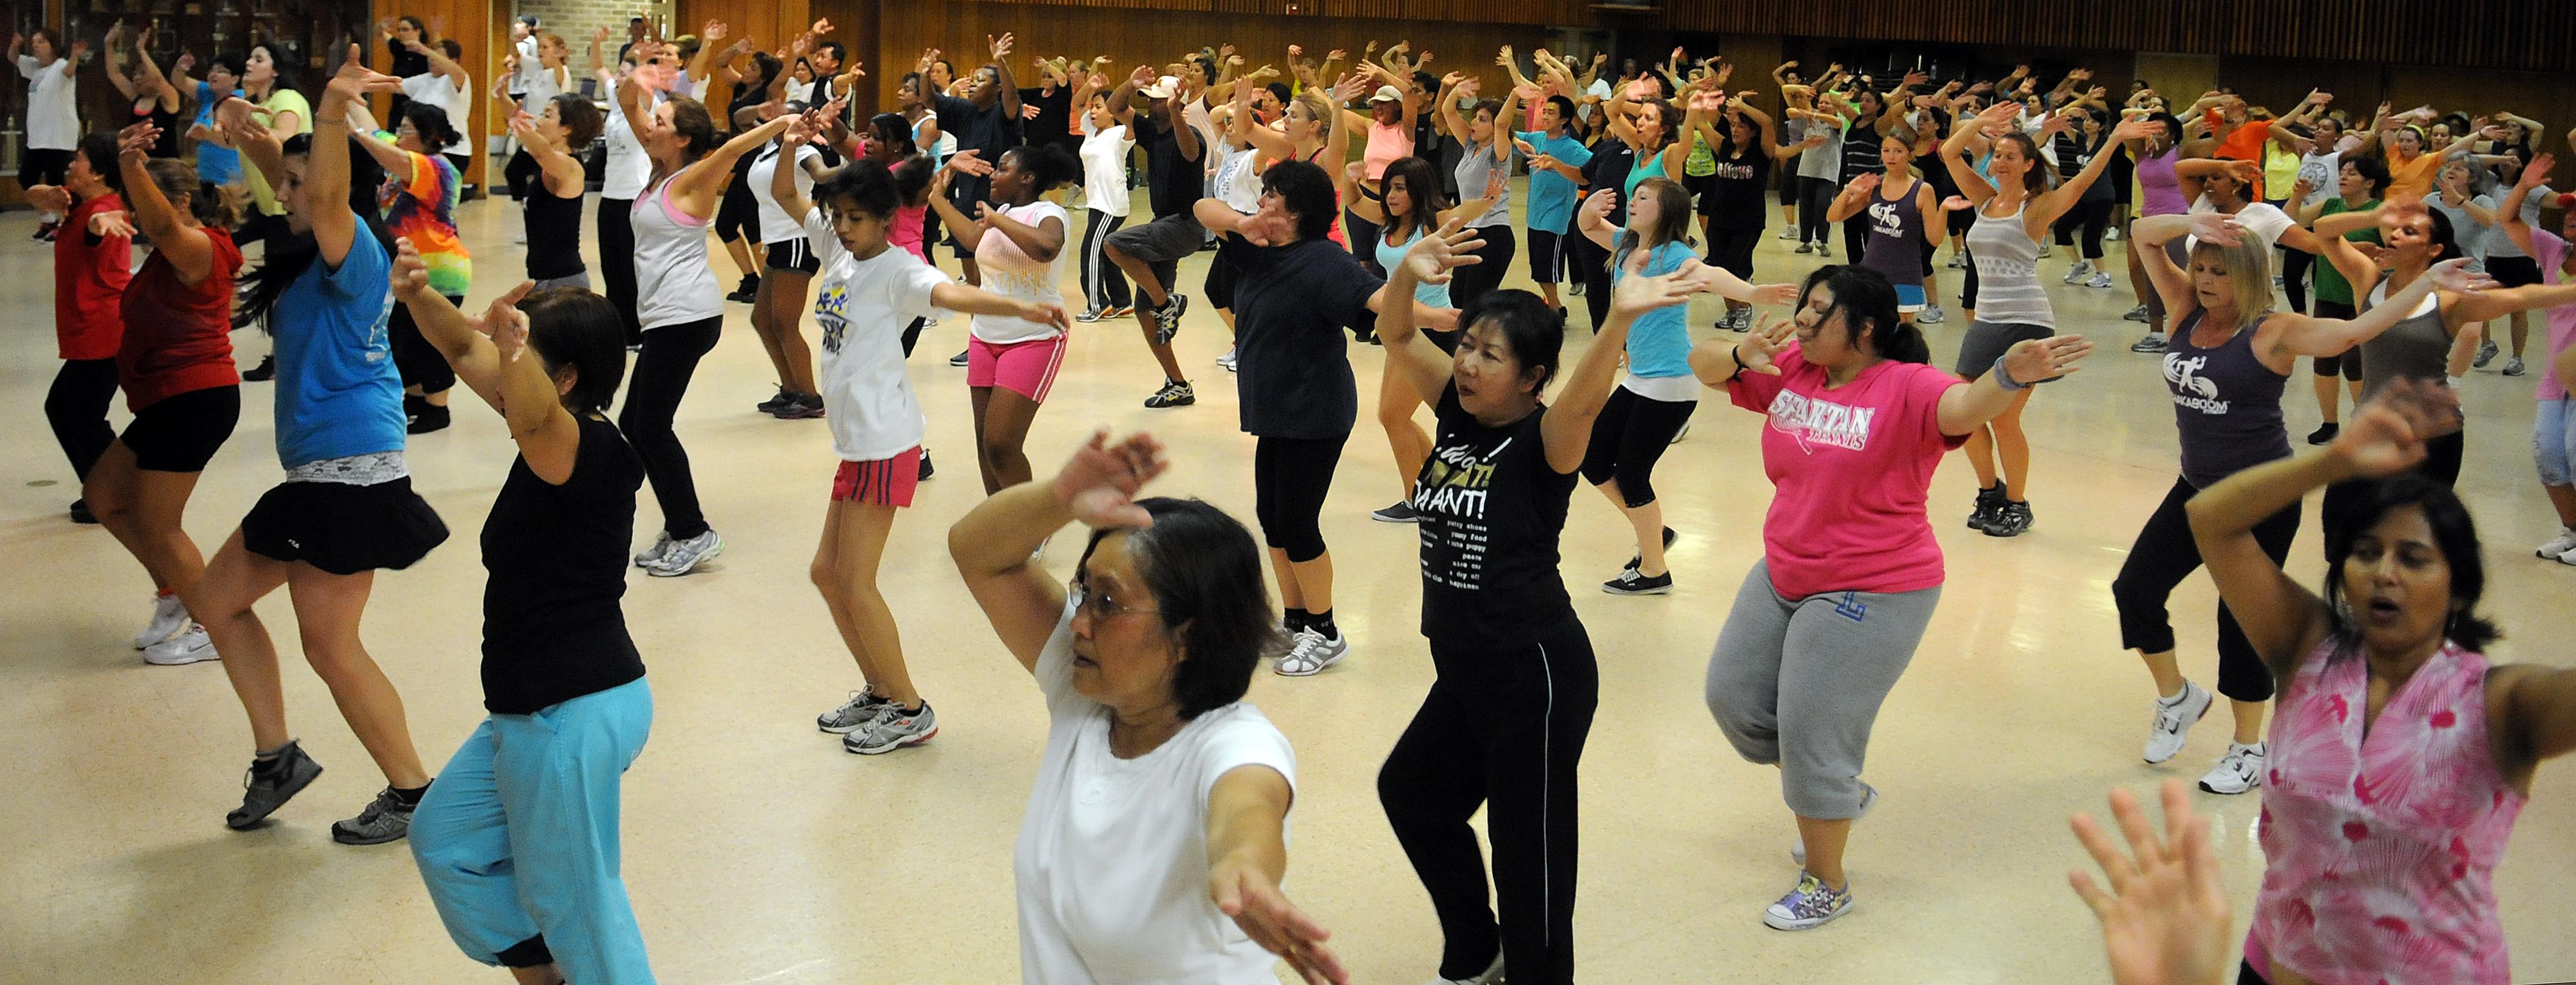 Zumba fitness class at Franconia Fire Station.